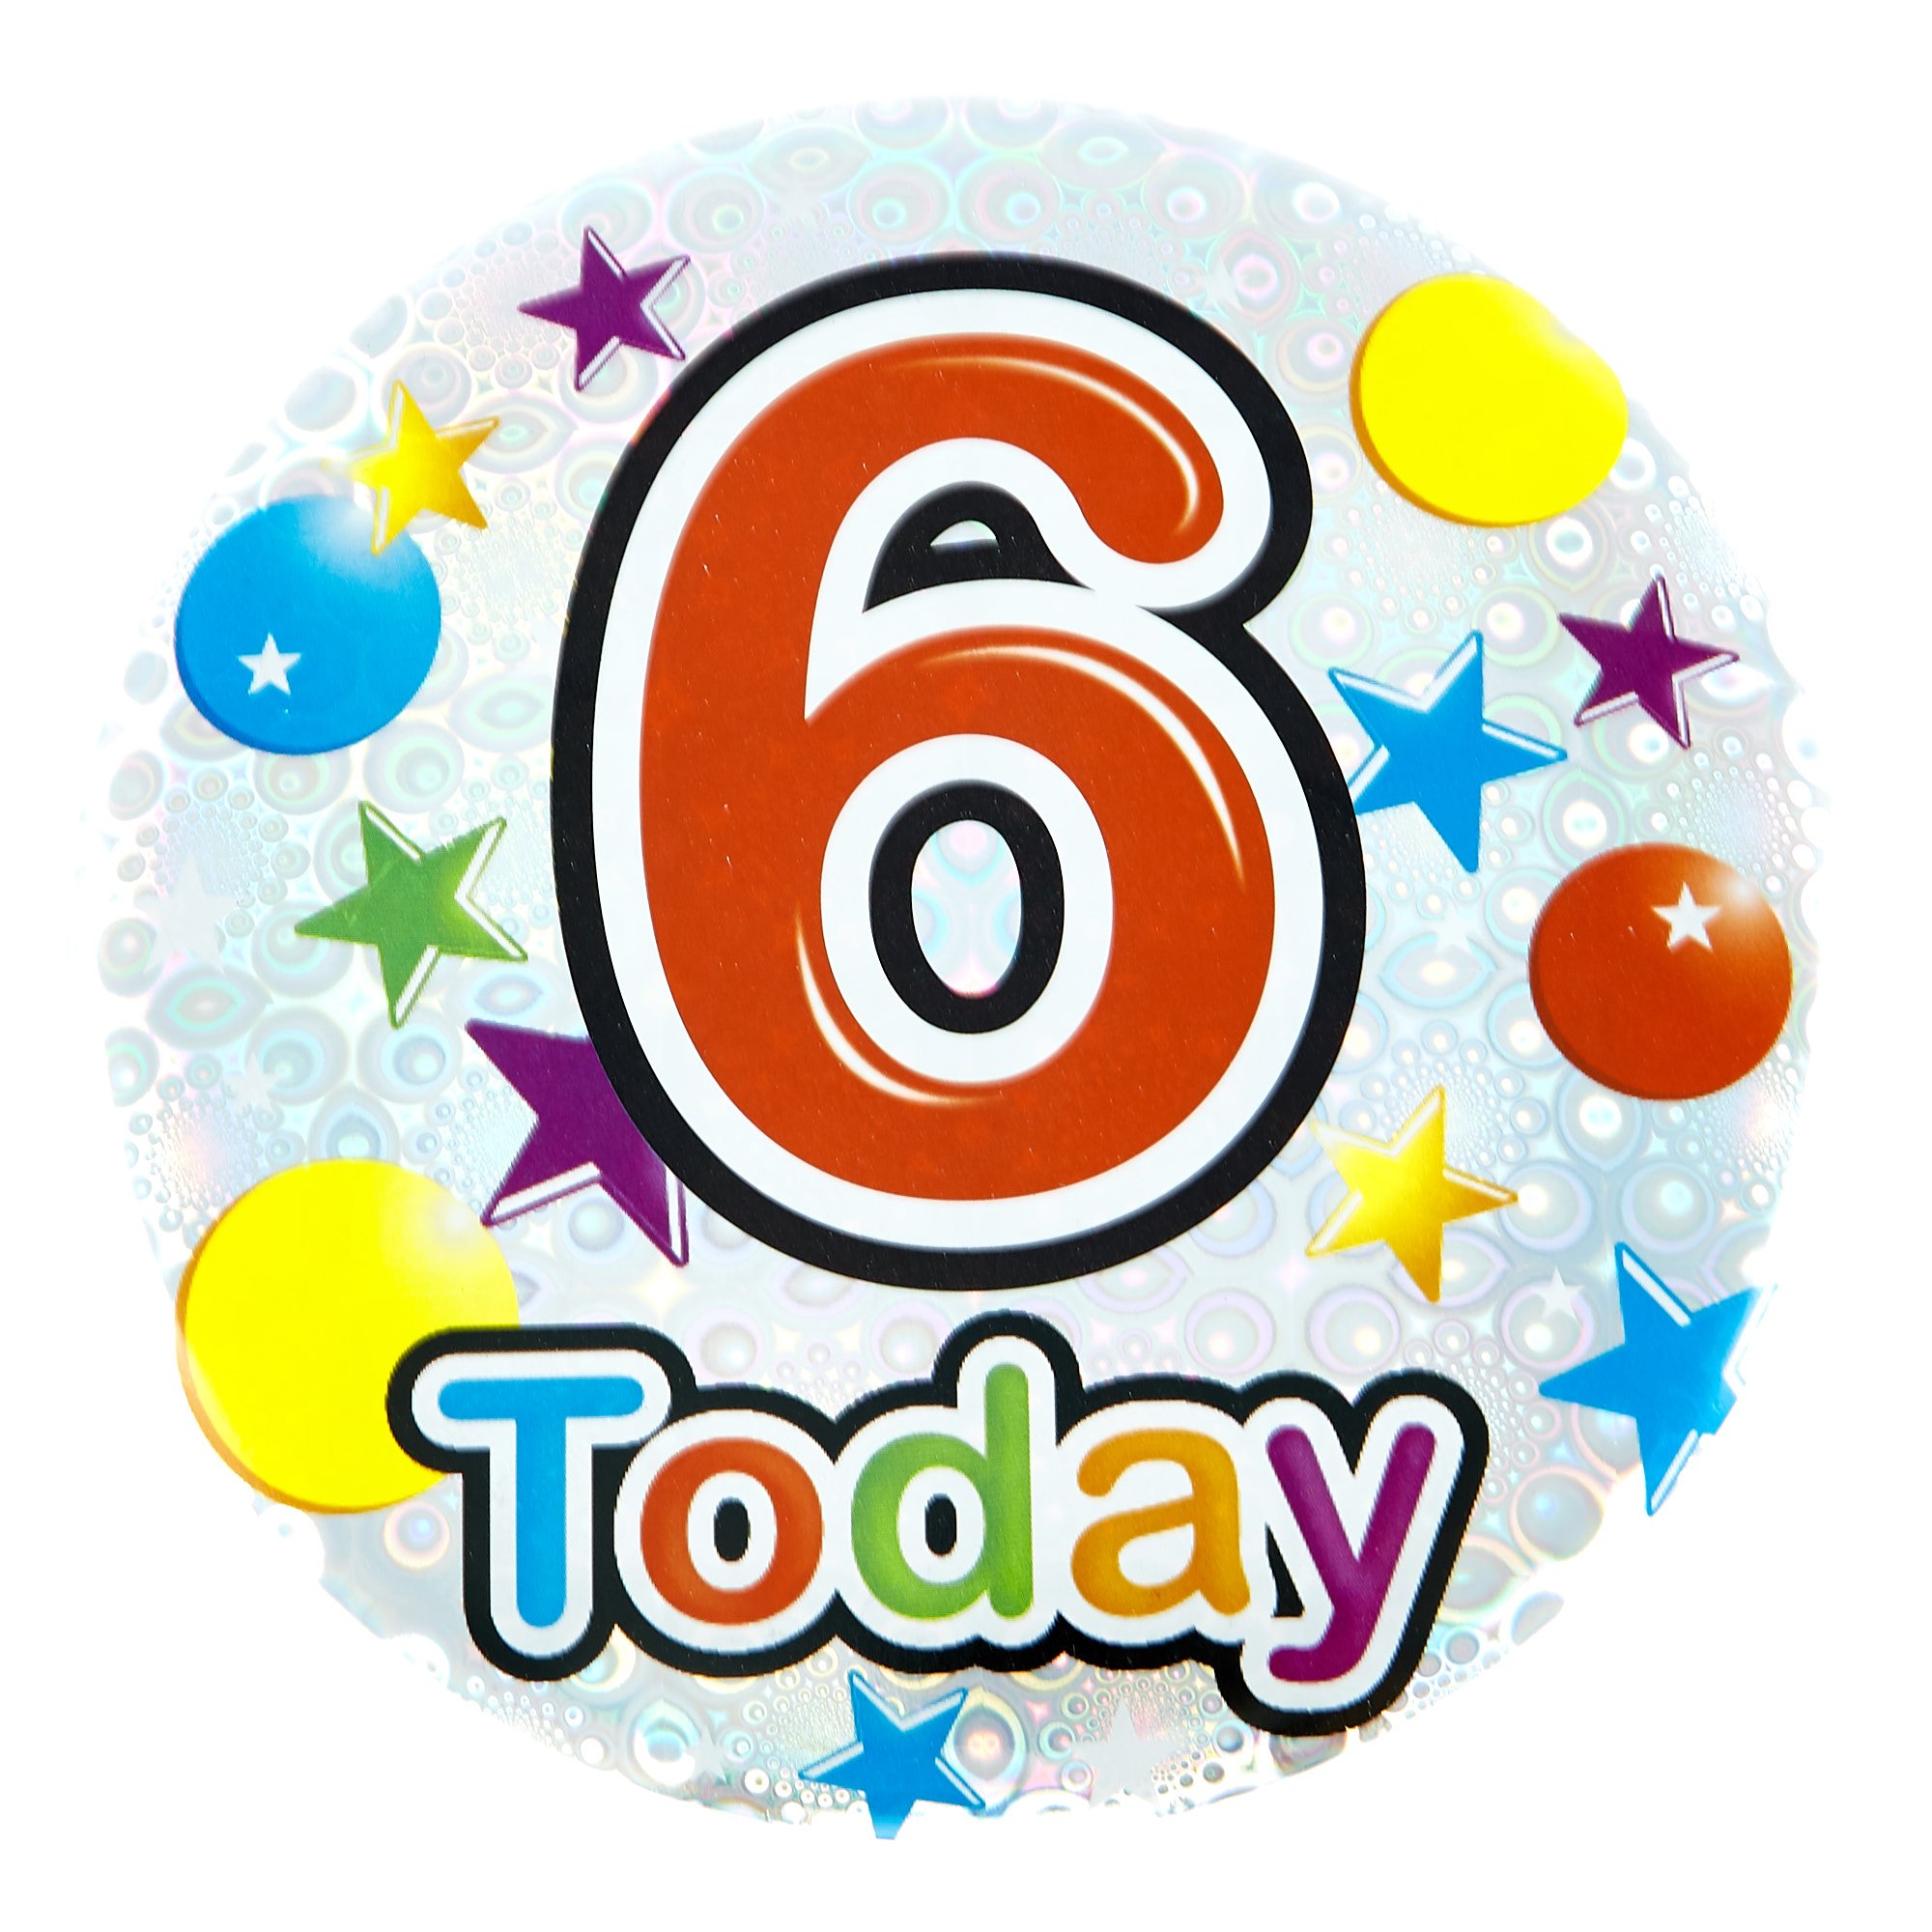 Giant 6th Birthday Badge - Silver